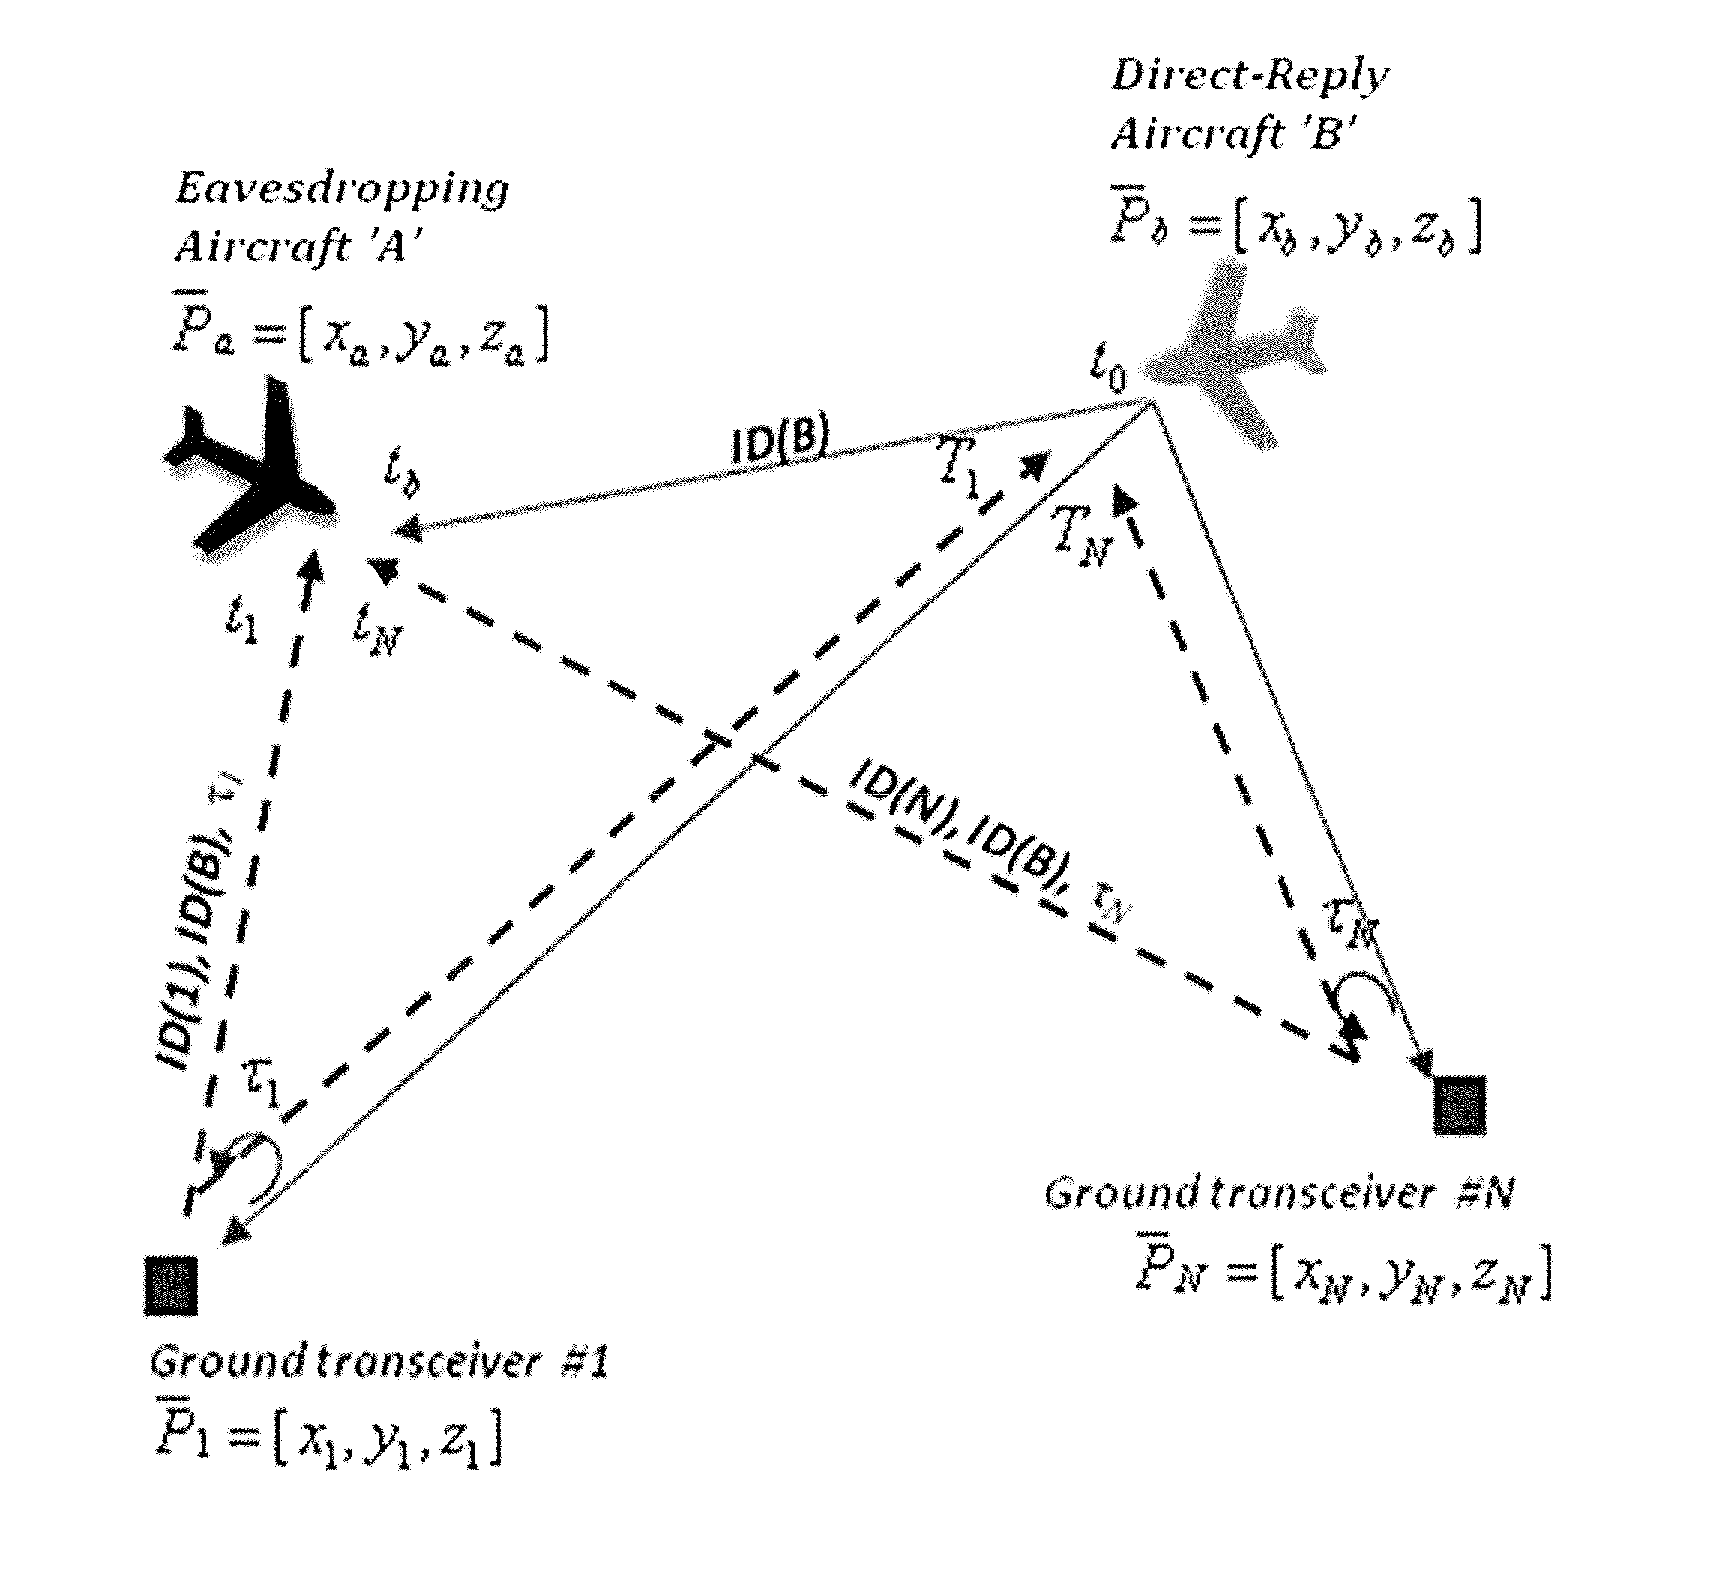 System and method for aircraft navigation based on diverse ranging algorithm using ads-b messages and ground transceiver responses